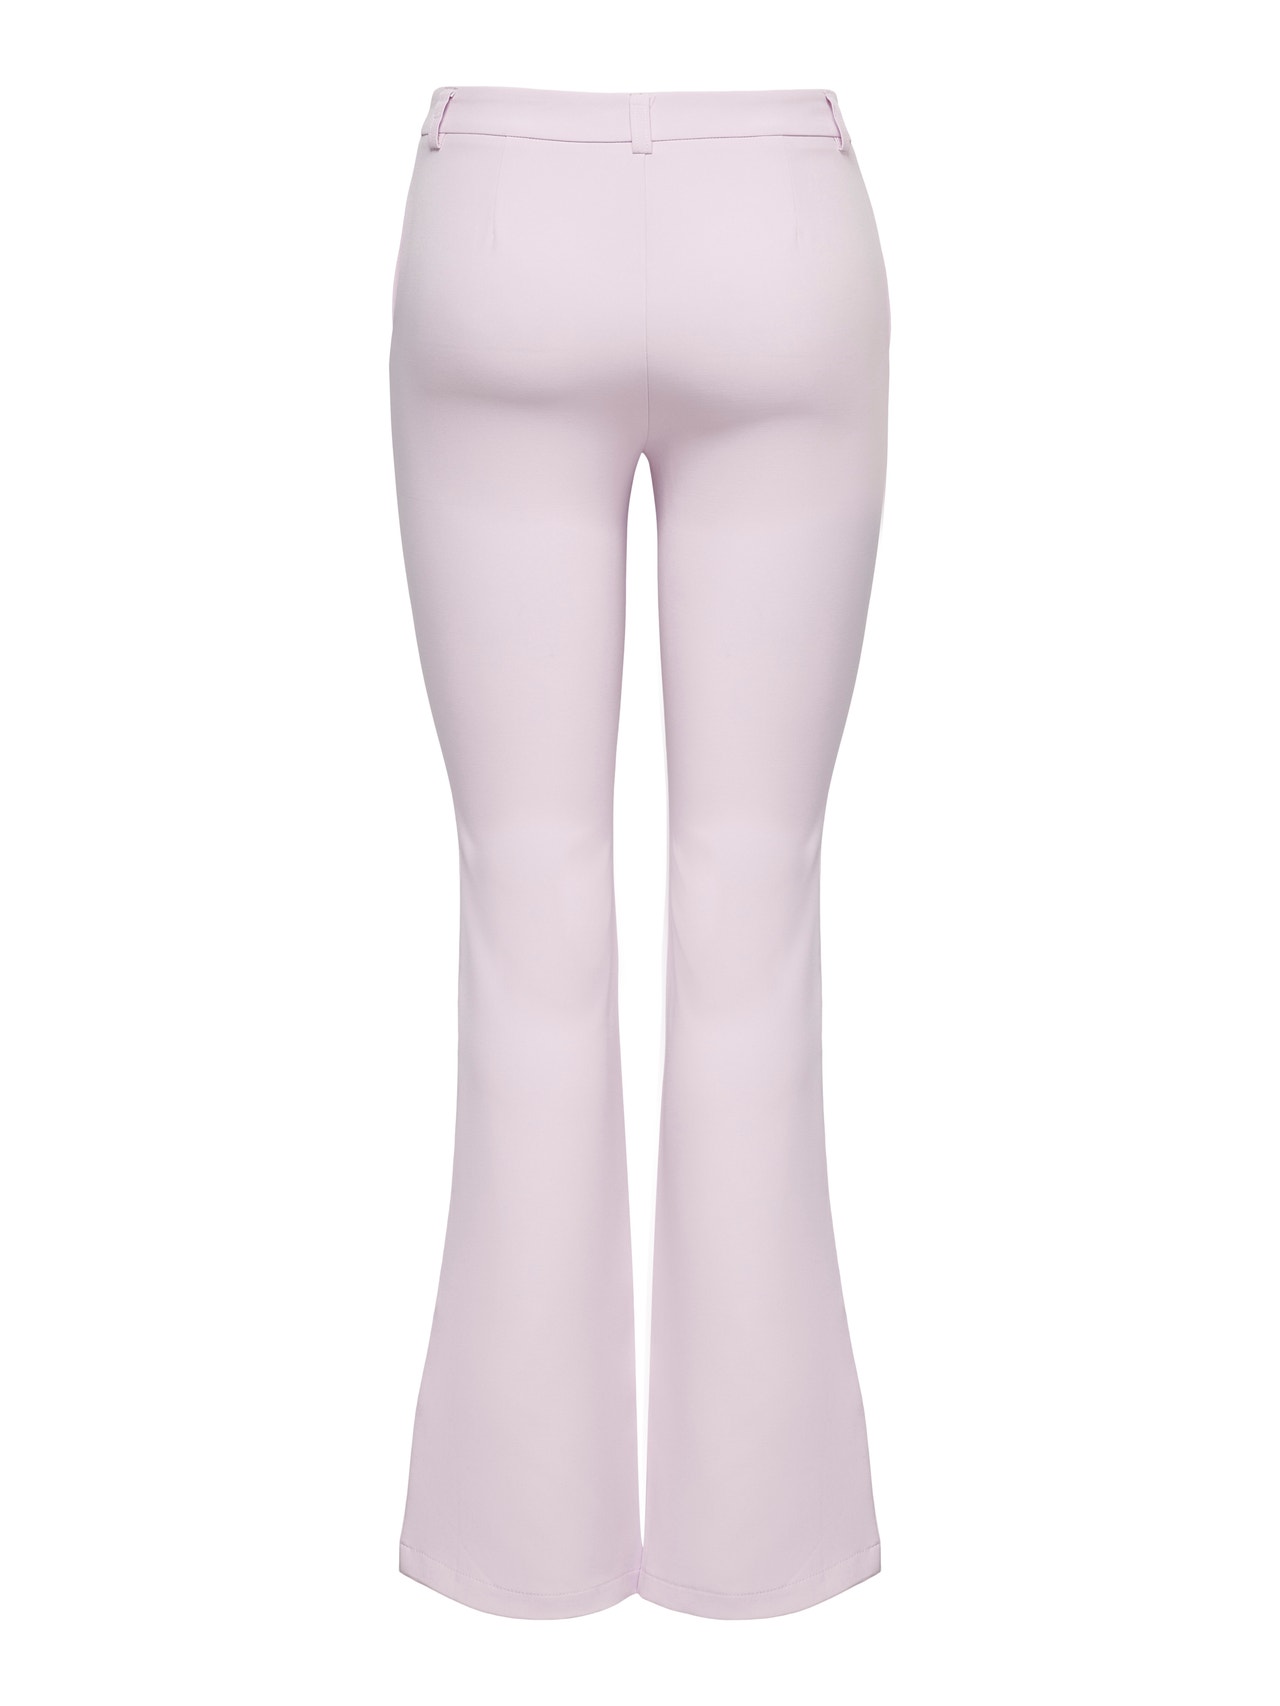 ONLY Ausgestellte Hose -Winsome Orchid - 15245640